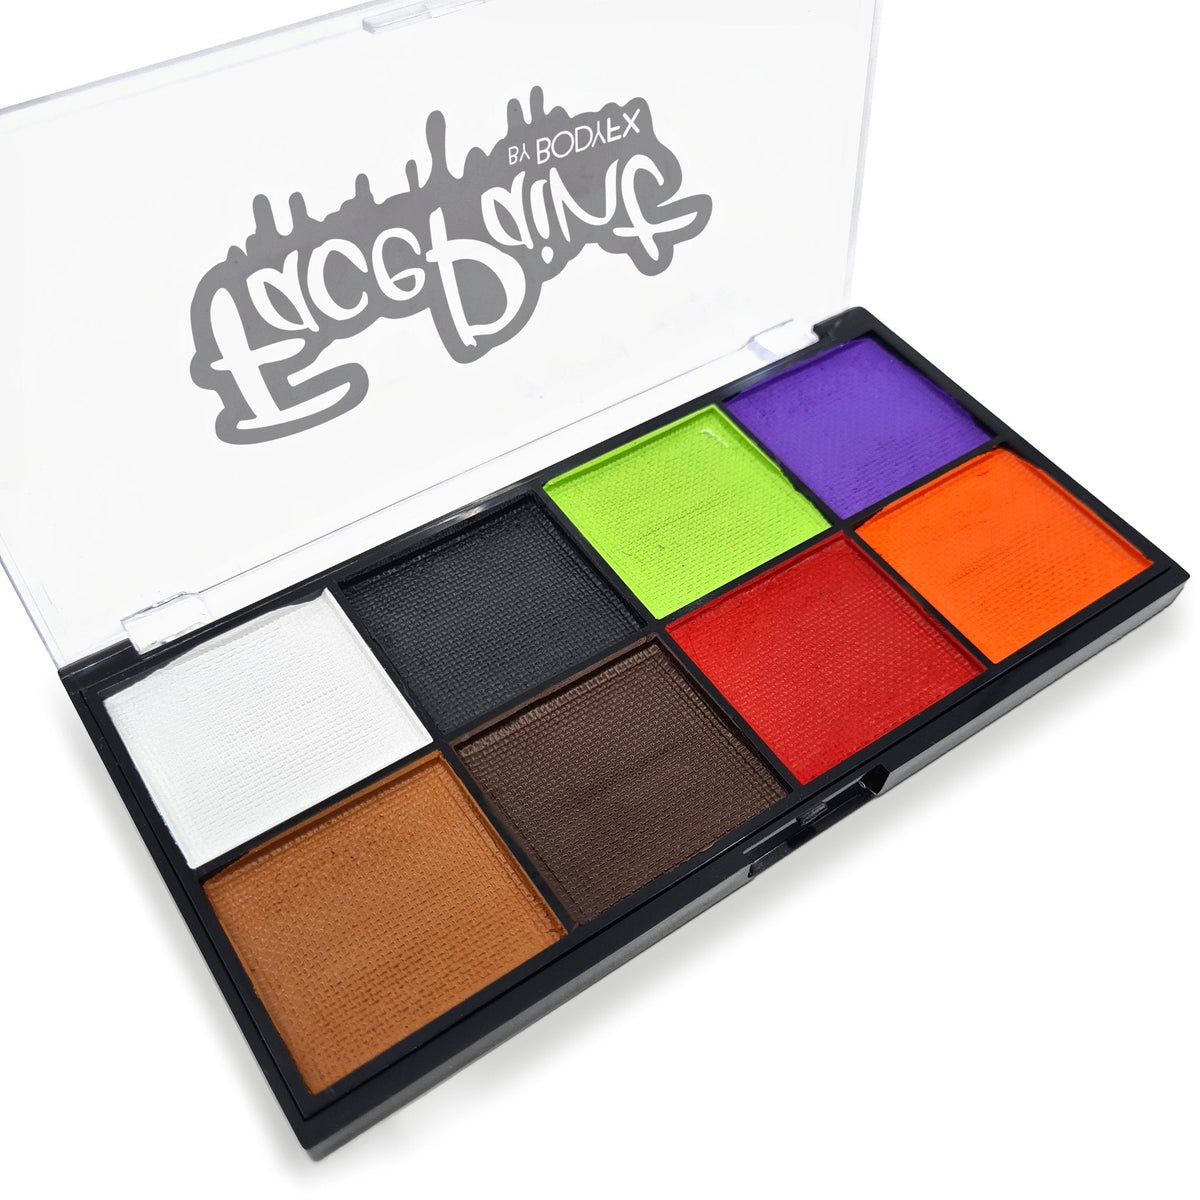 Halloween face paint palette with Mini Halloween stencil